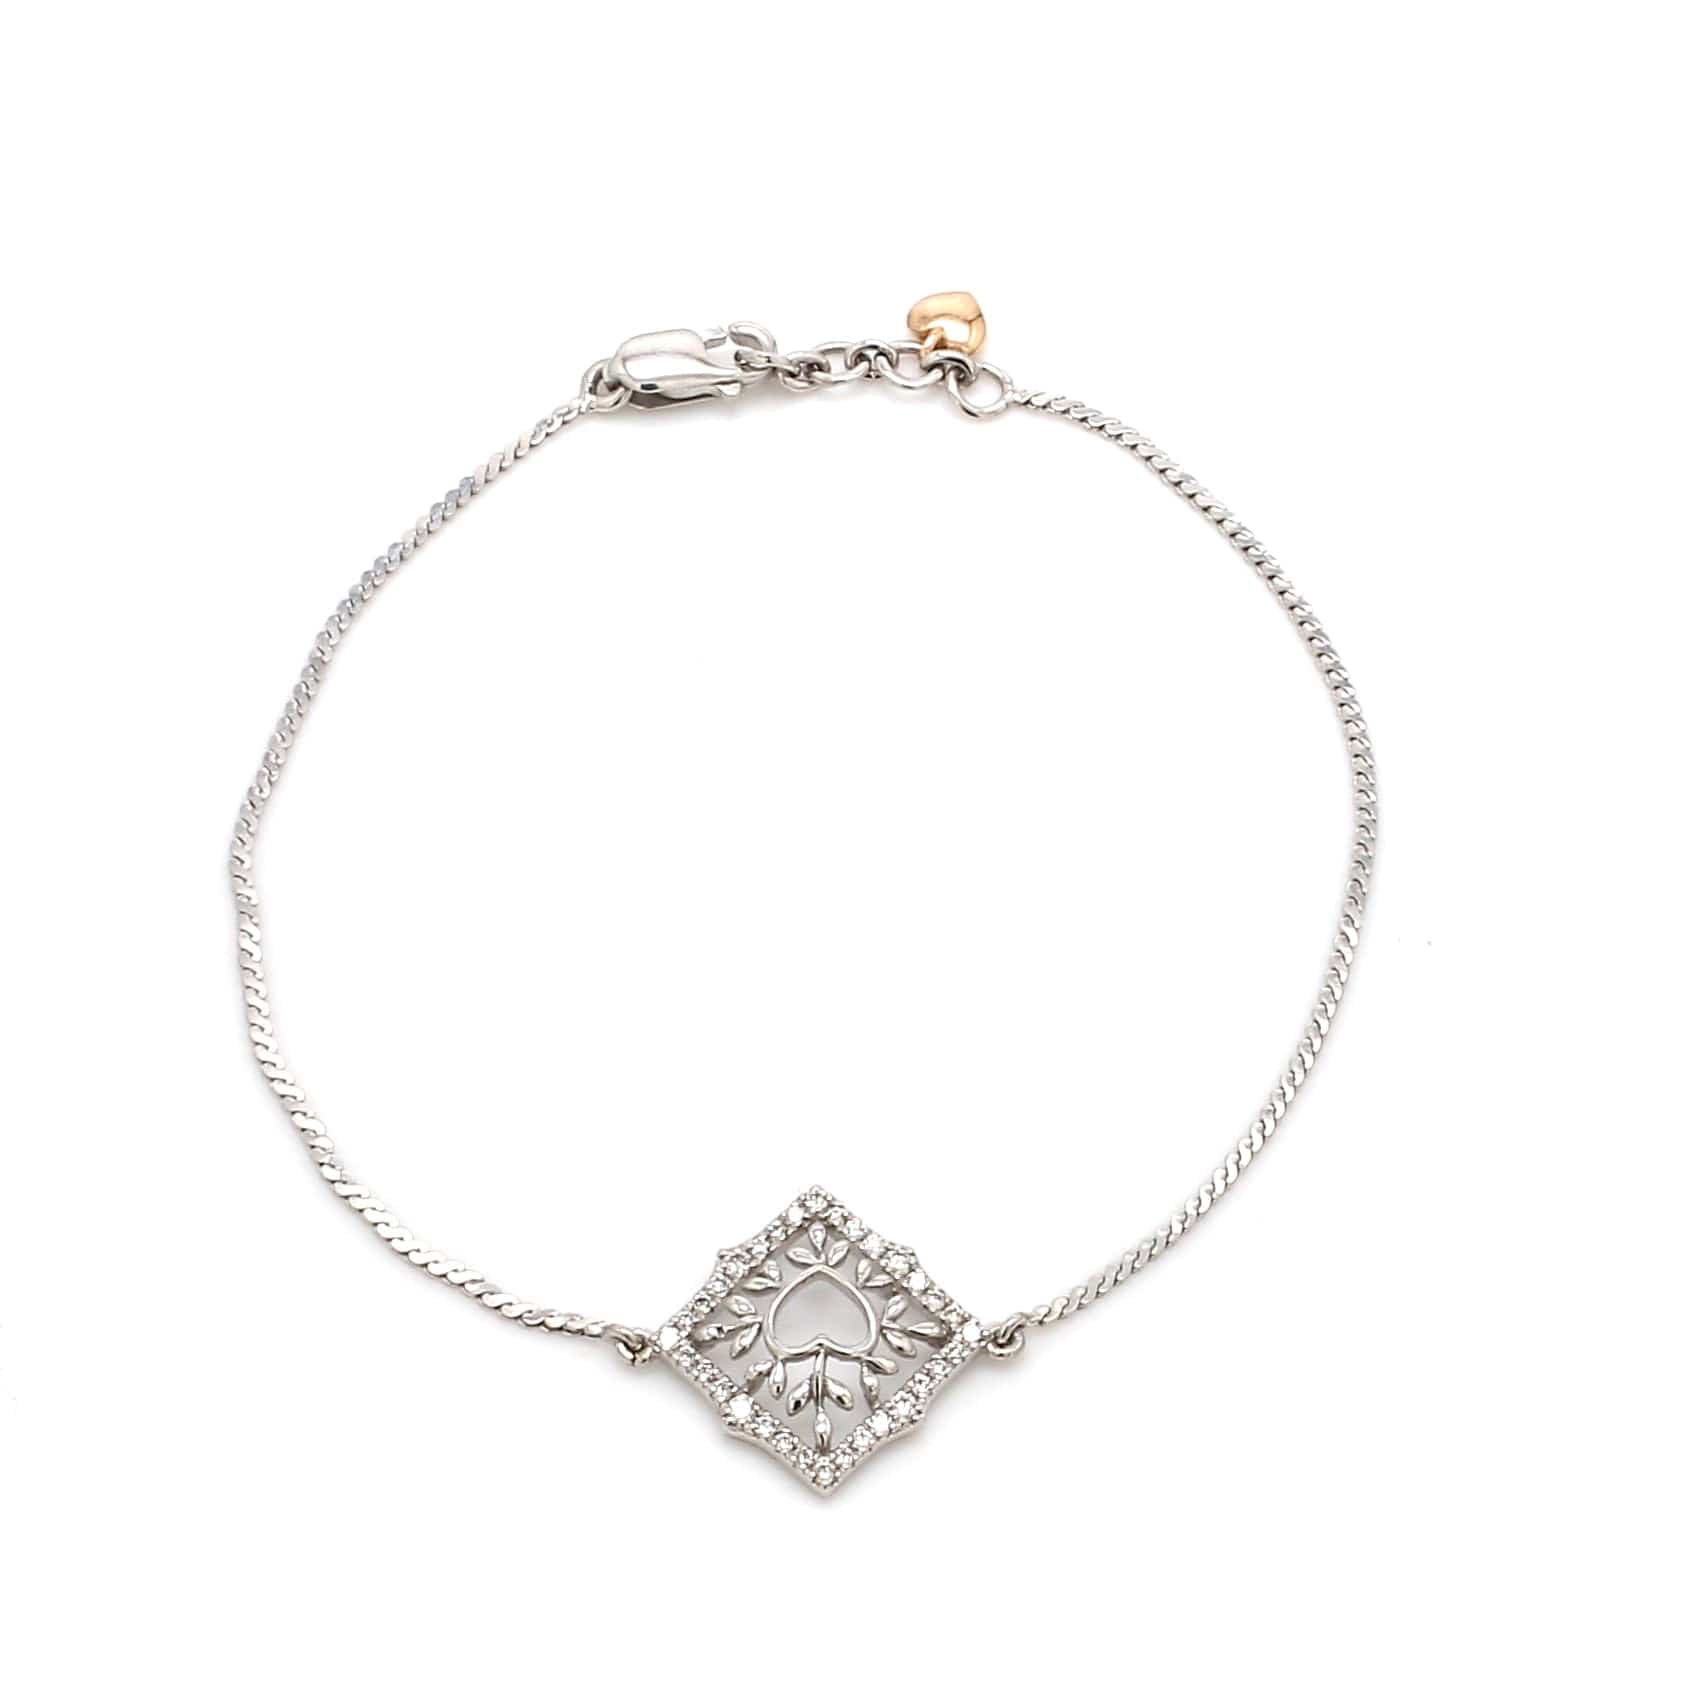 Buy Priyaasi Square Studded American Diamond Silver-Plated Bracelet Online  At Best Price @ Tata CLiQ